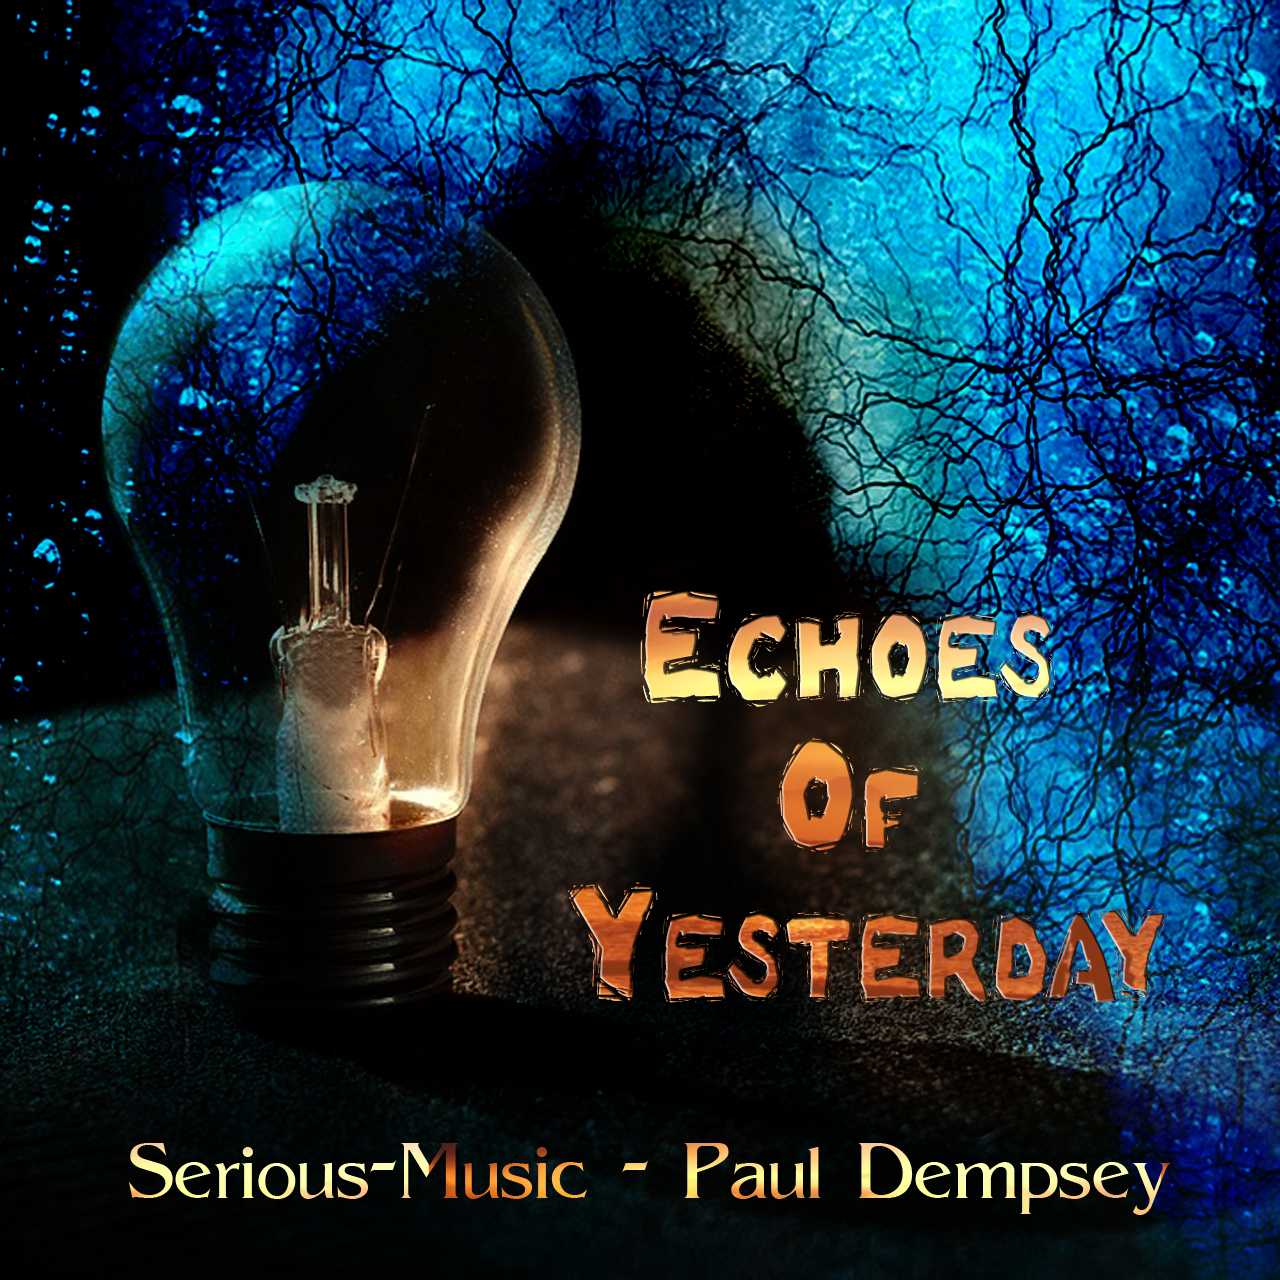 Echoes Of Yesterday feat. Paul Dempsey - Album ECHOES OF YESTERDAY